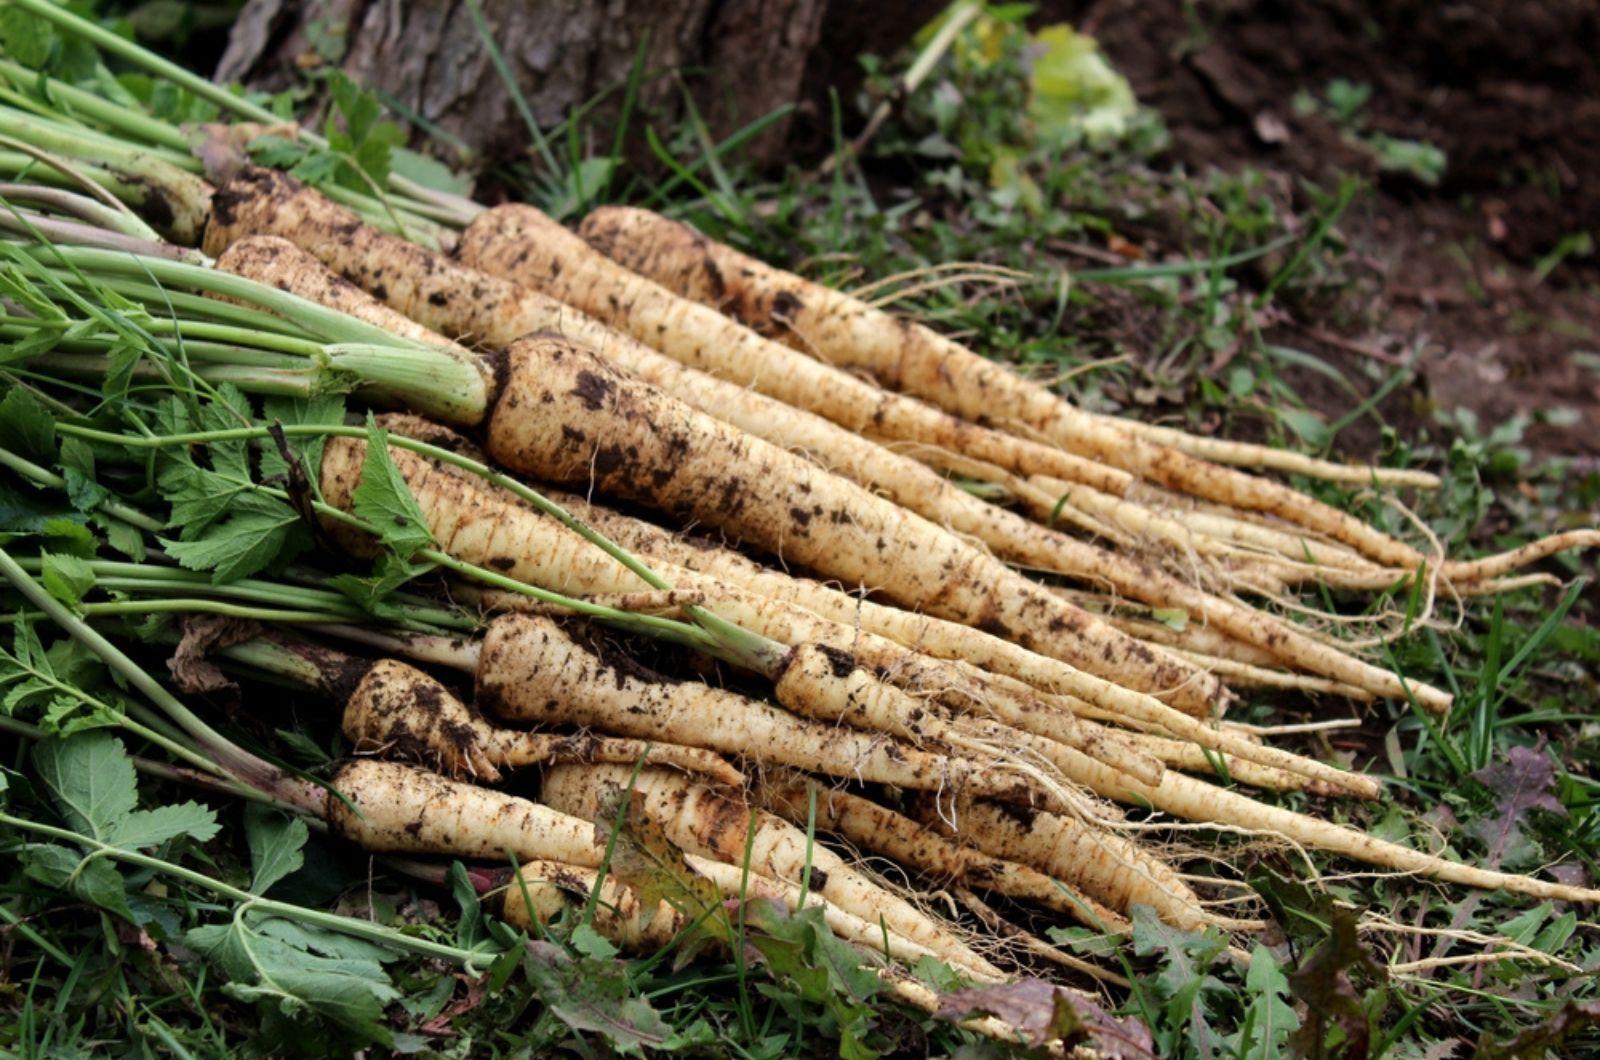 Fresh parsnips with leaves on the ground